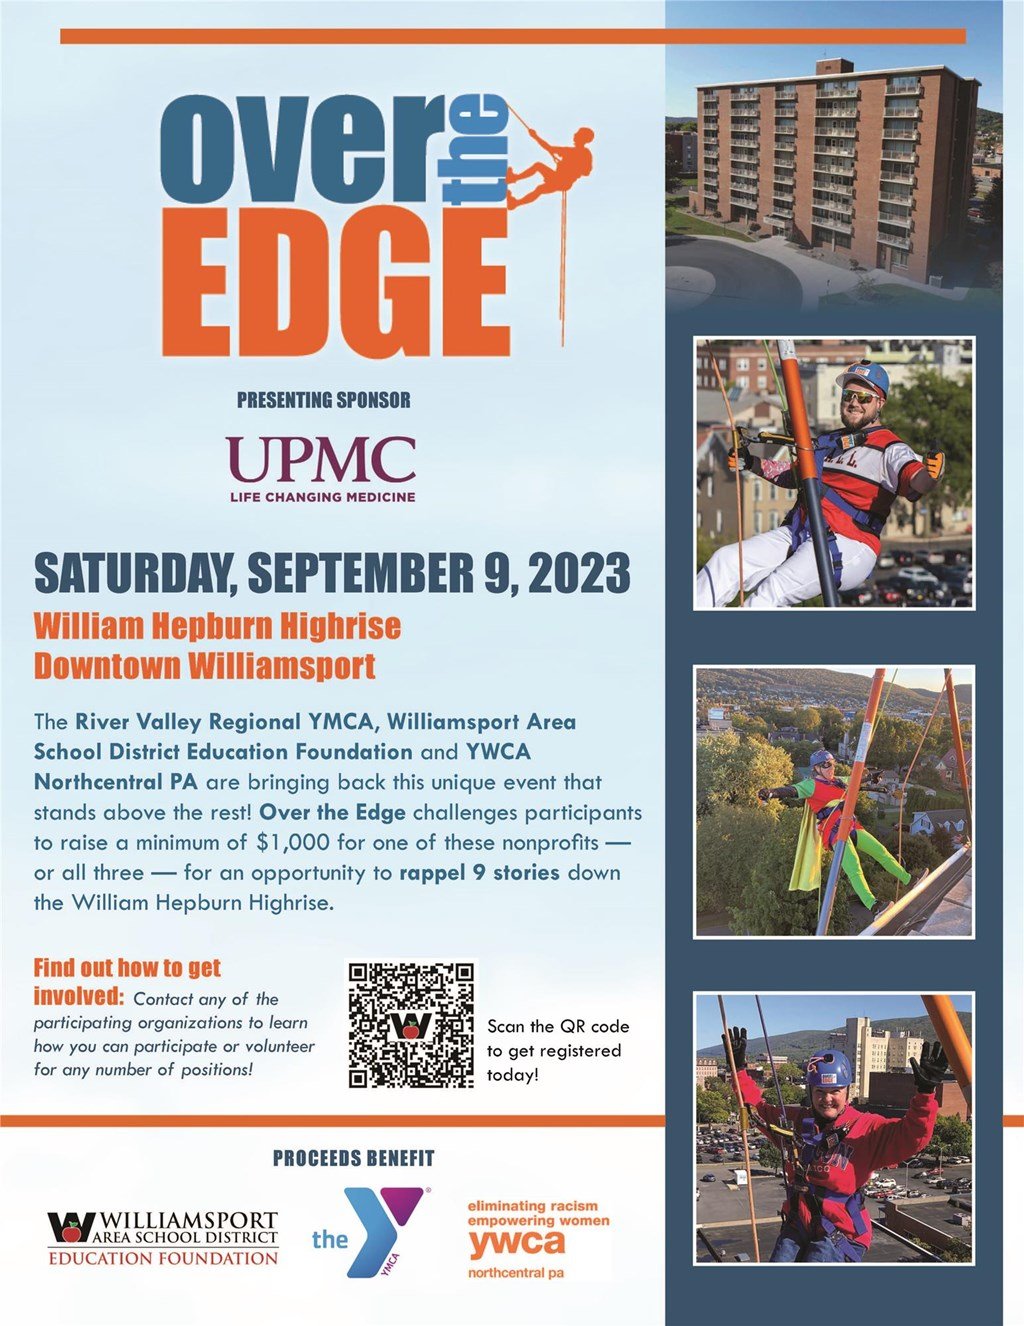 2023 Over the Edge Promotional Flyer